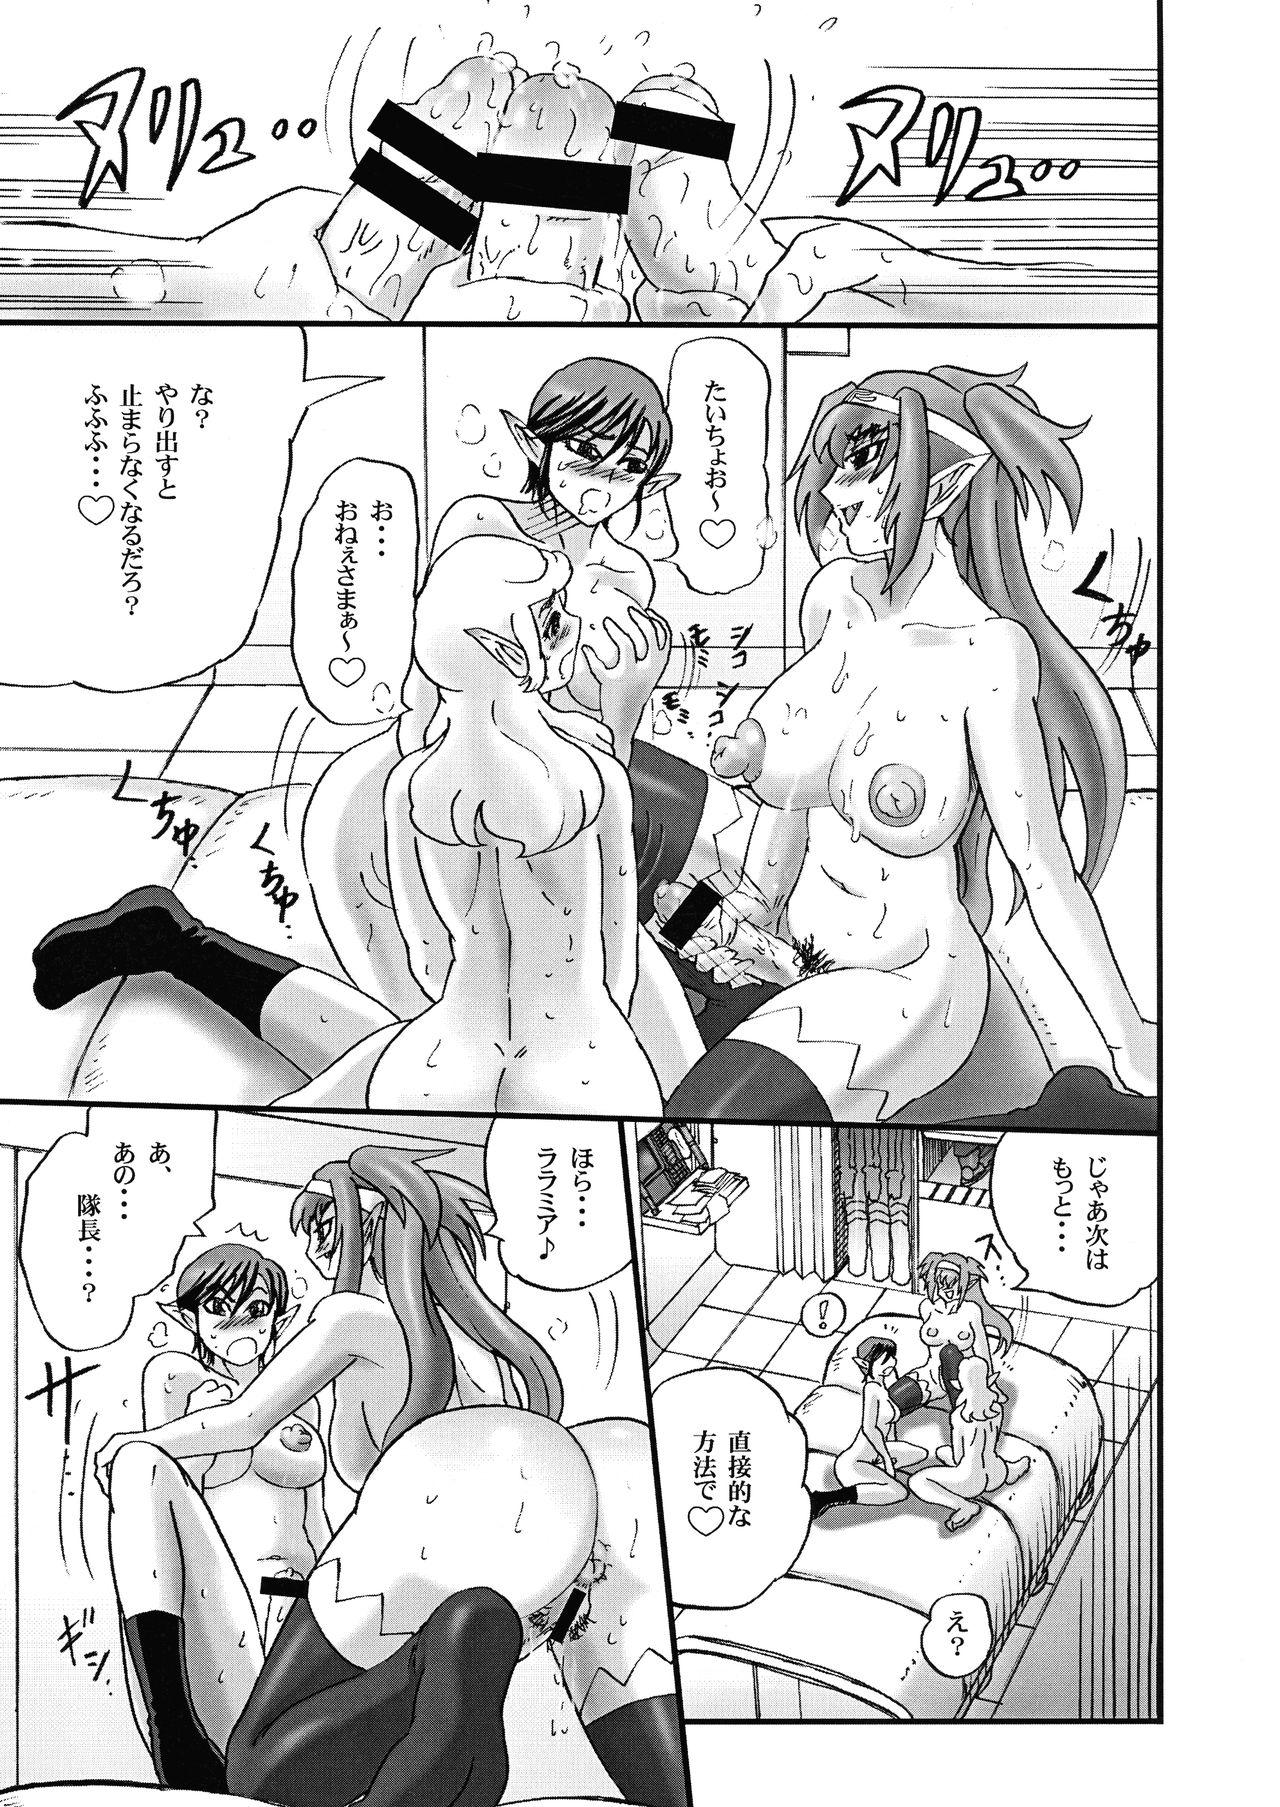 Whipping PIX SENSE - Macross frontier Phat Ass - Page 11